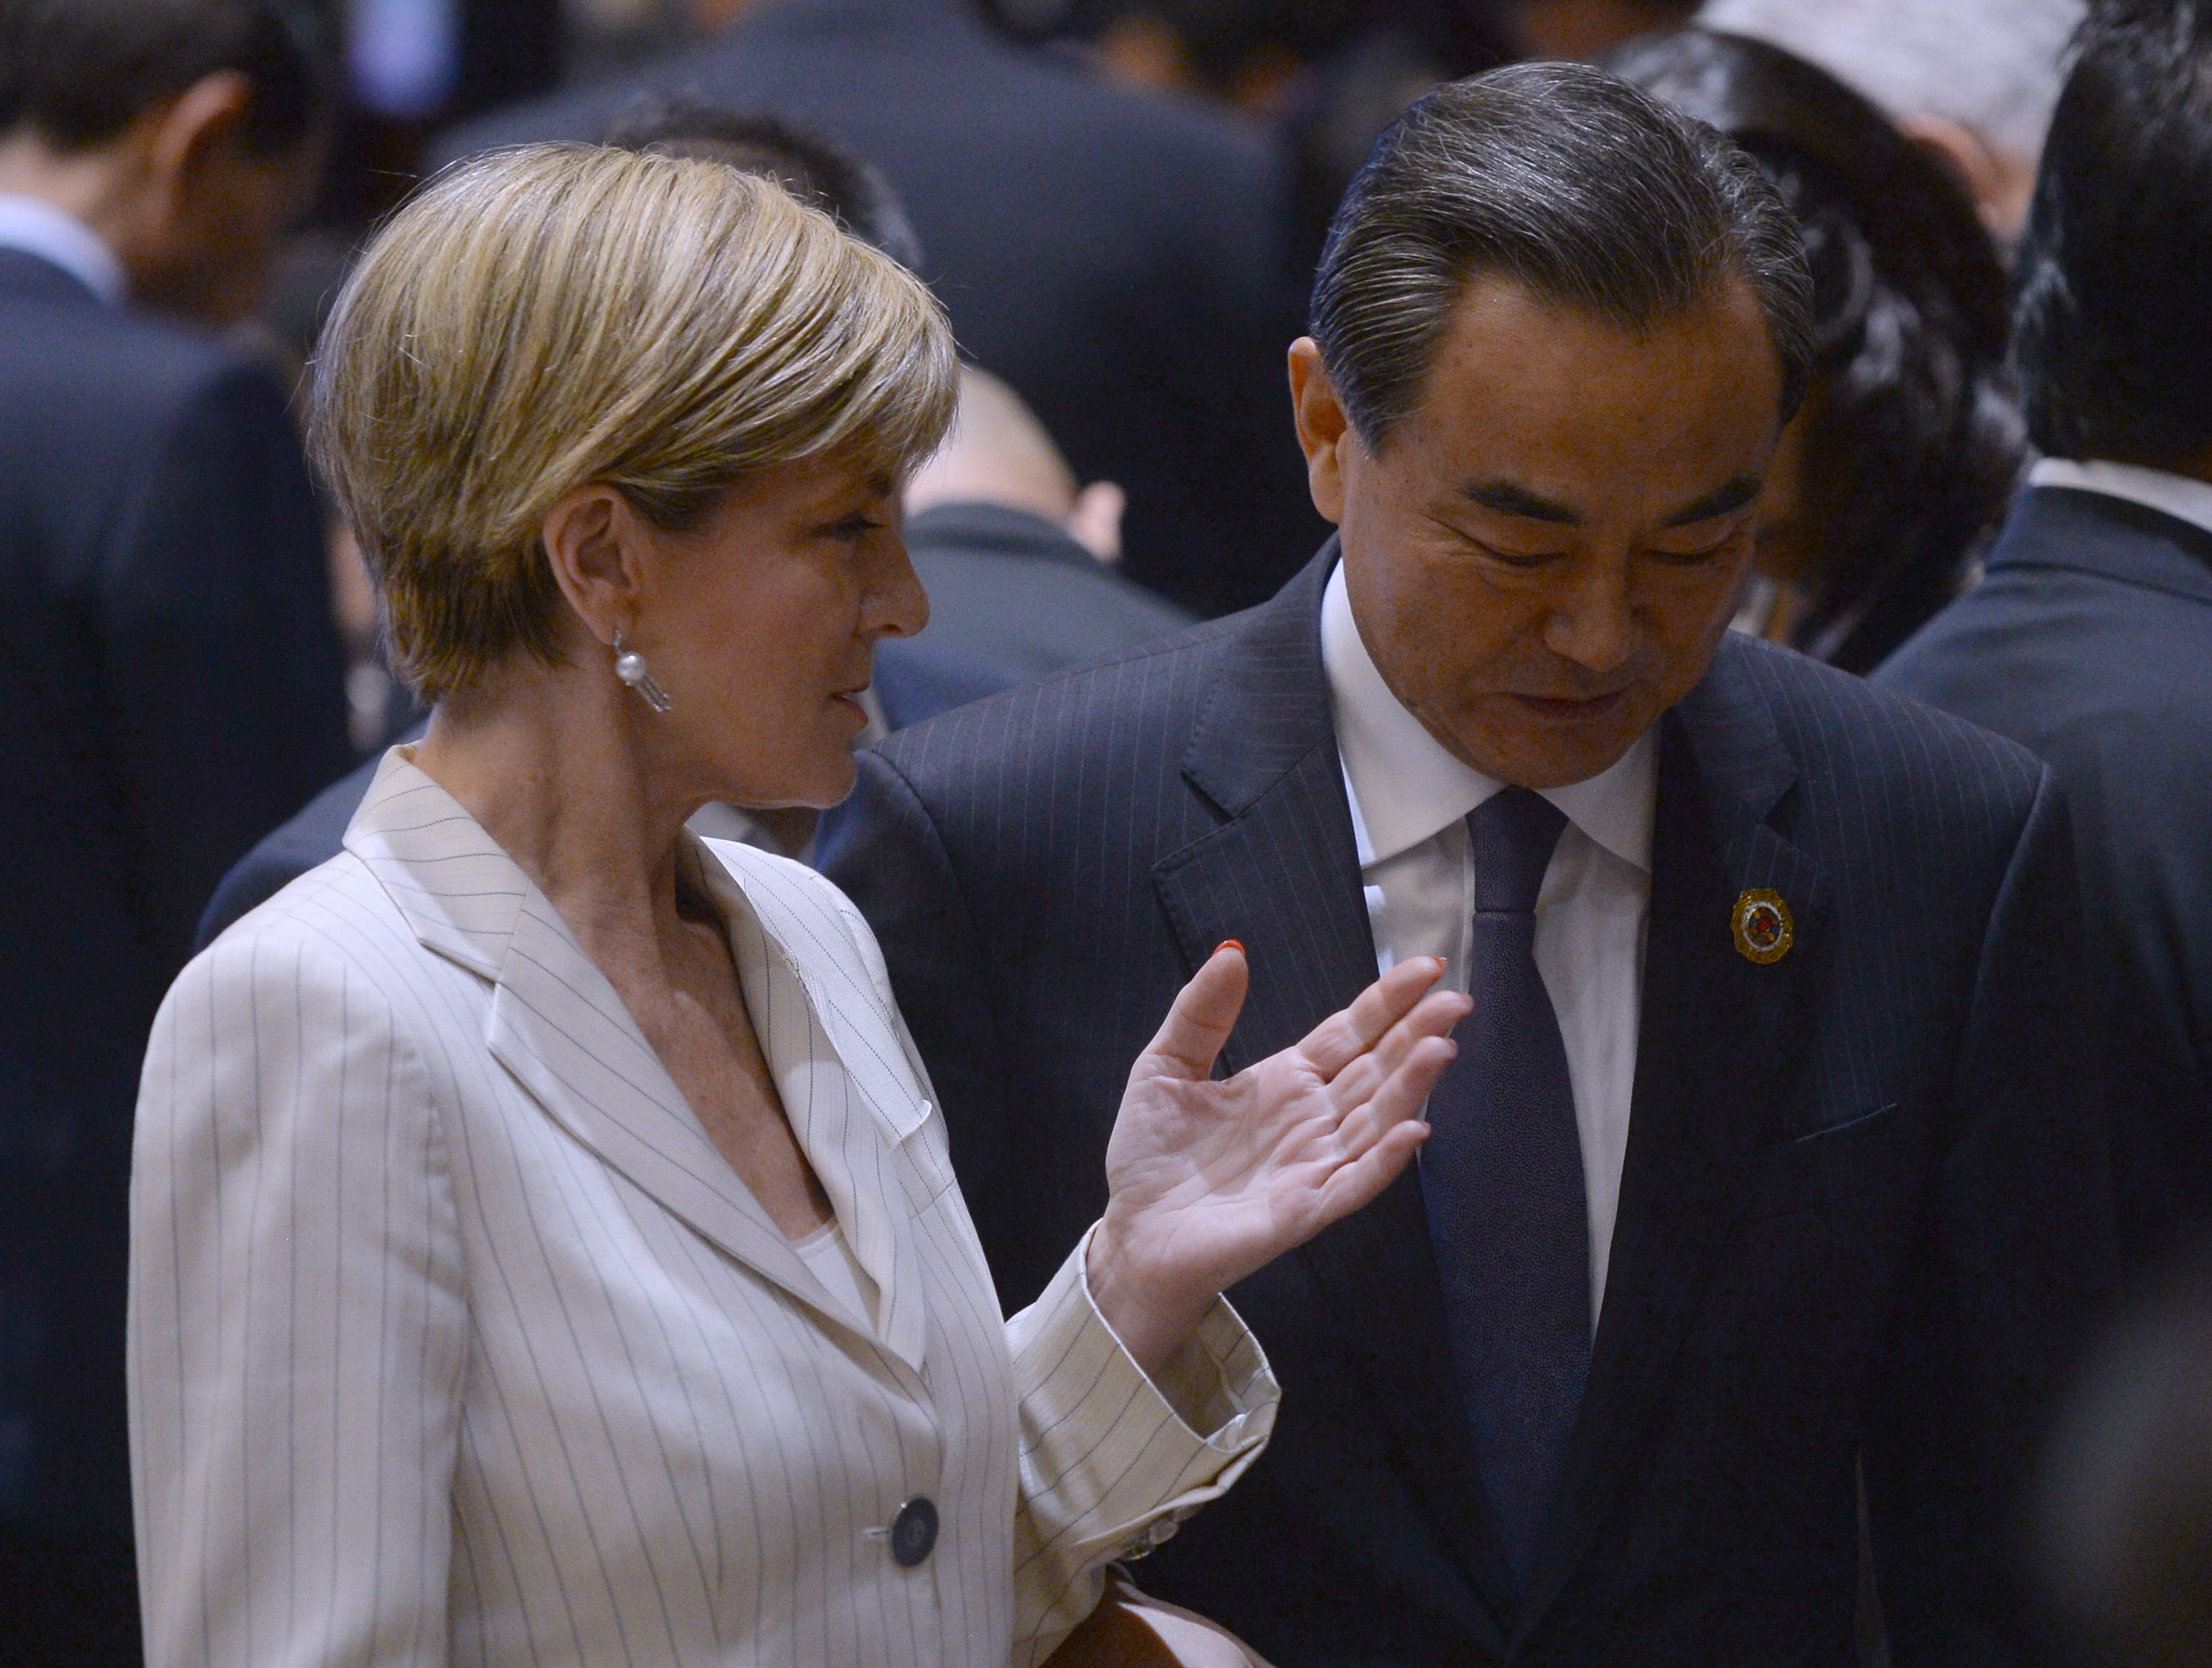 Australian Foreign Minister Julie Bishop talks with Chinese Foreign Minister Wang Yi during the East Asia Foreign Ministers' meeting on the sidelines of the Association of Southeast Asian Nations annual ministerial meeting in Vientiane on Tuesday. | AFP-JIJI